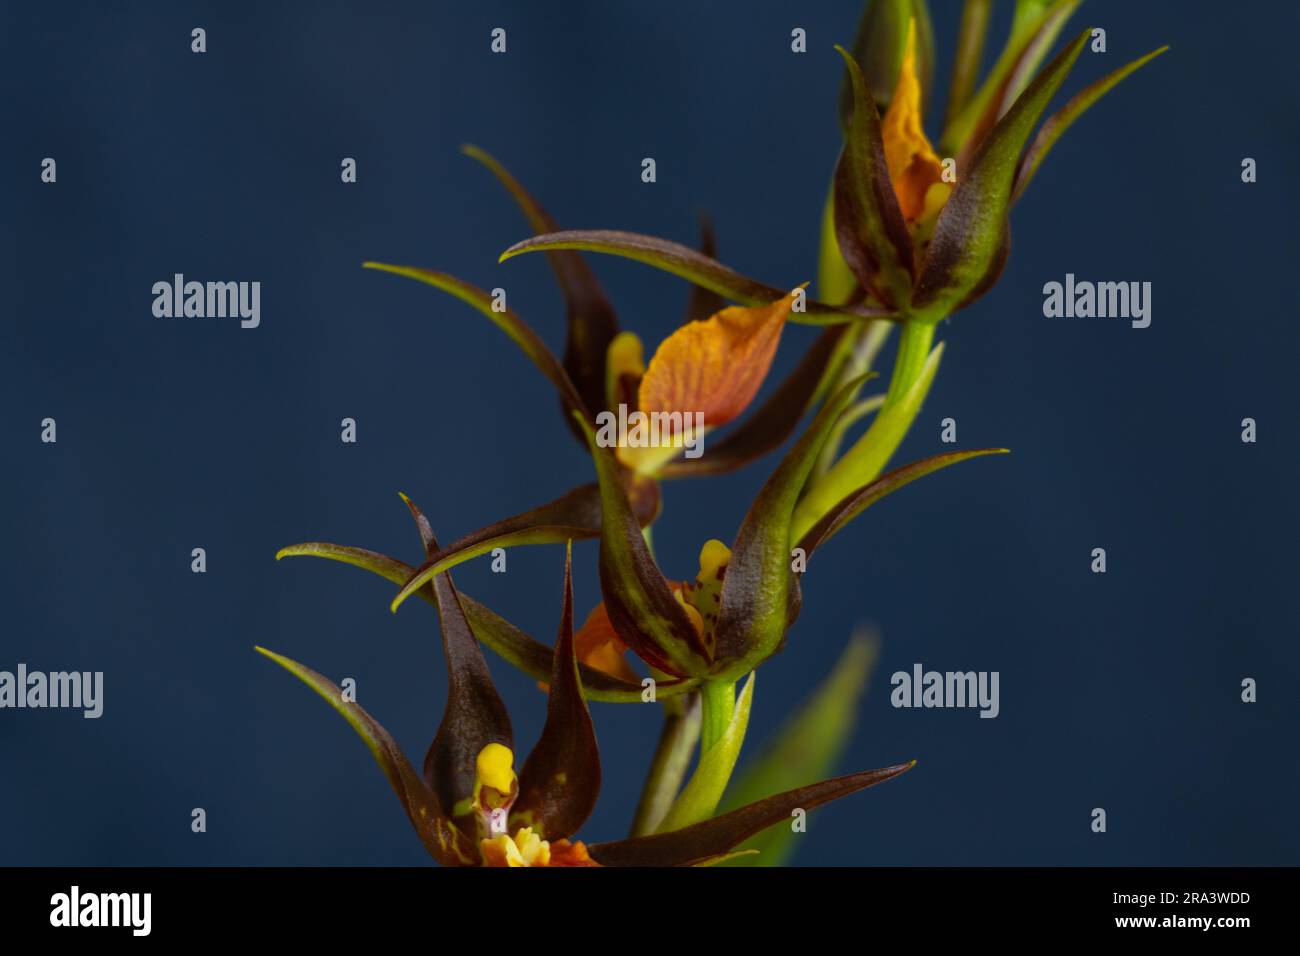 brown cambria orchid flowers on dark background close-up Stock Photo